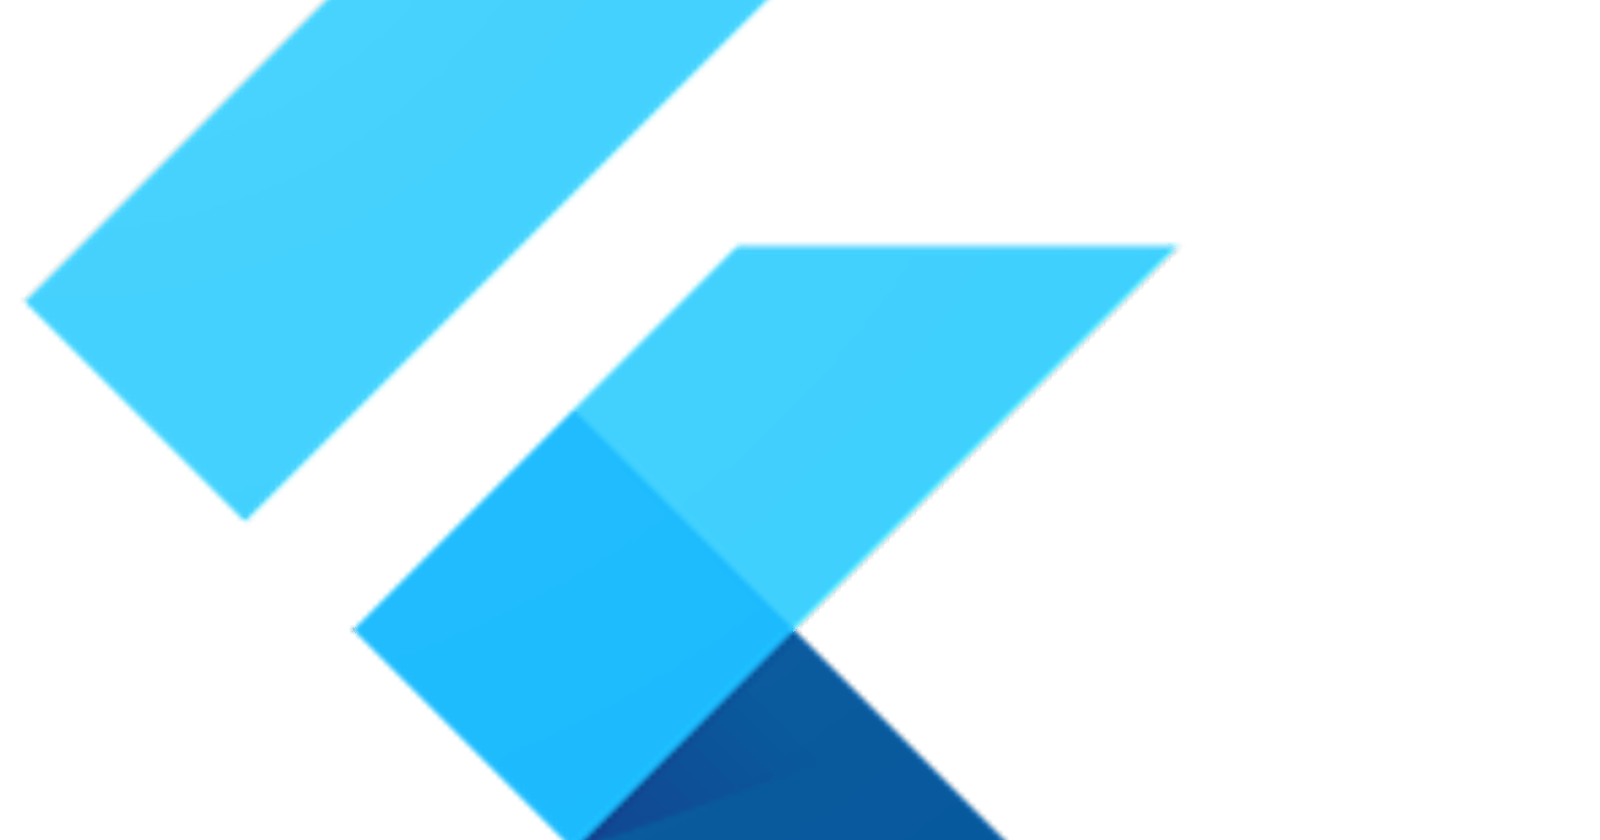 Why I'm switching to Flutter and Dart